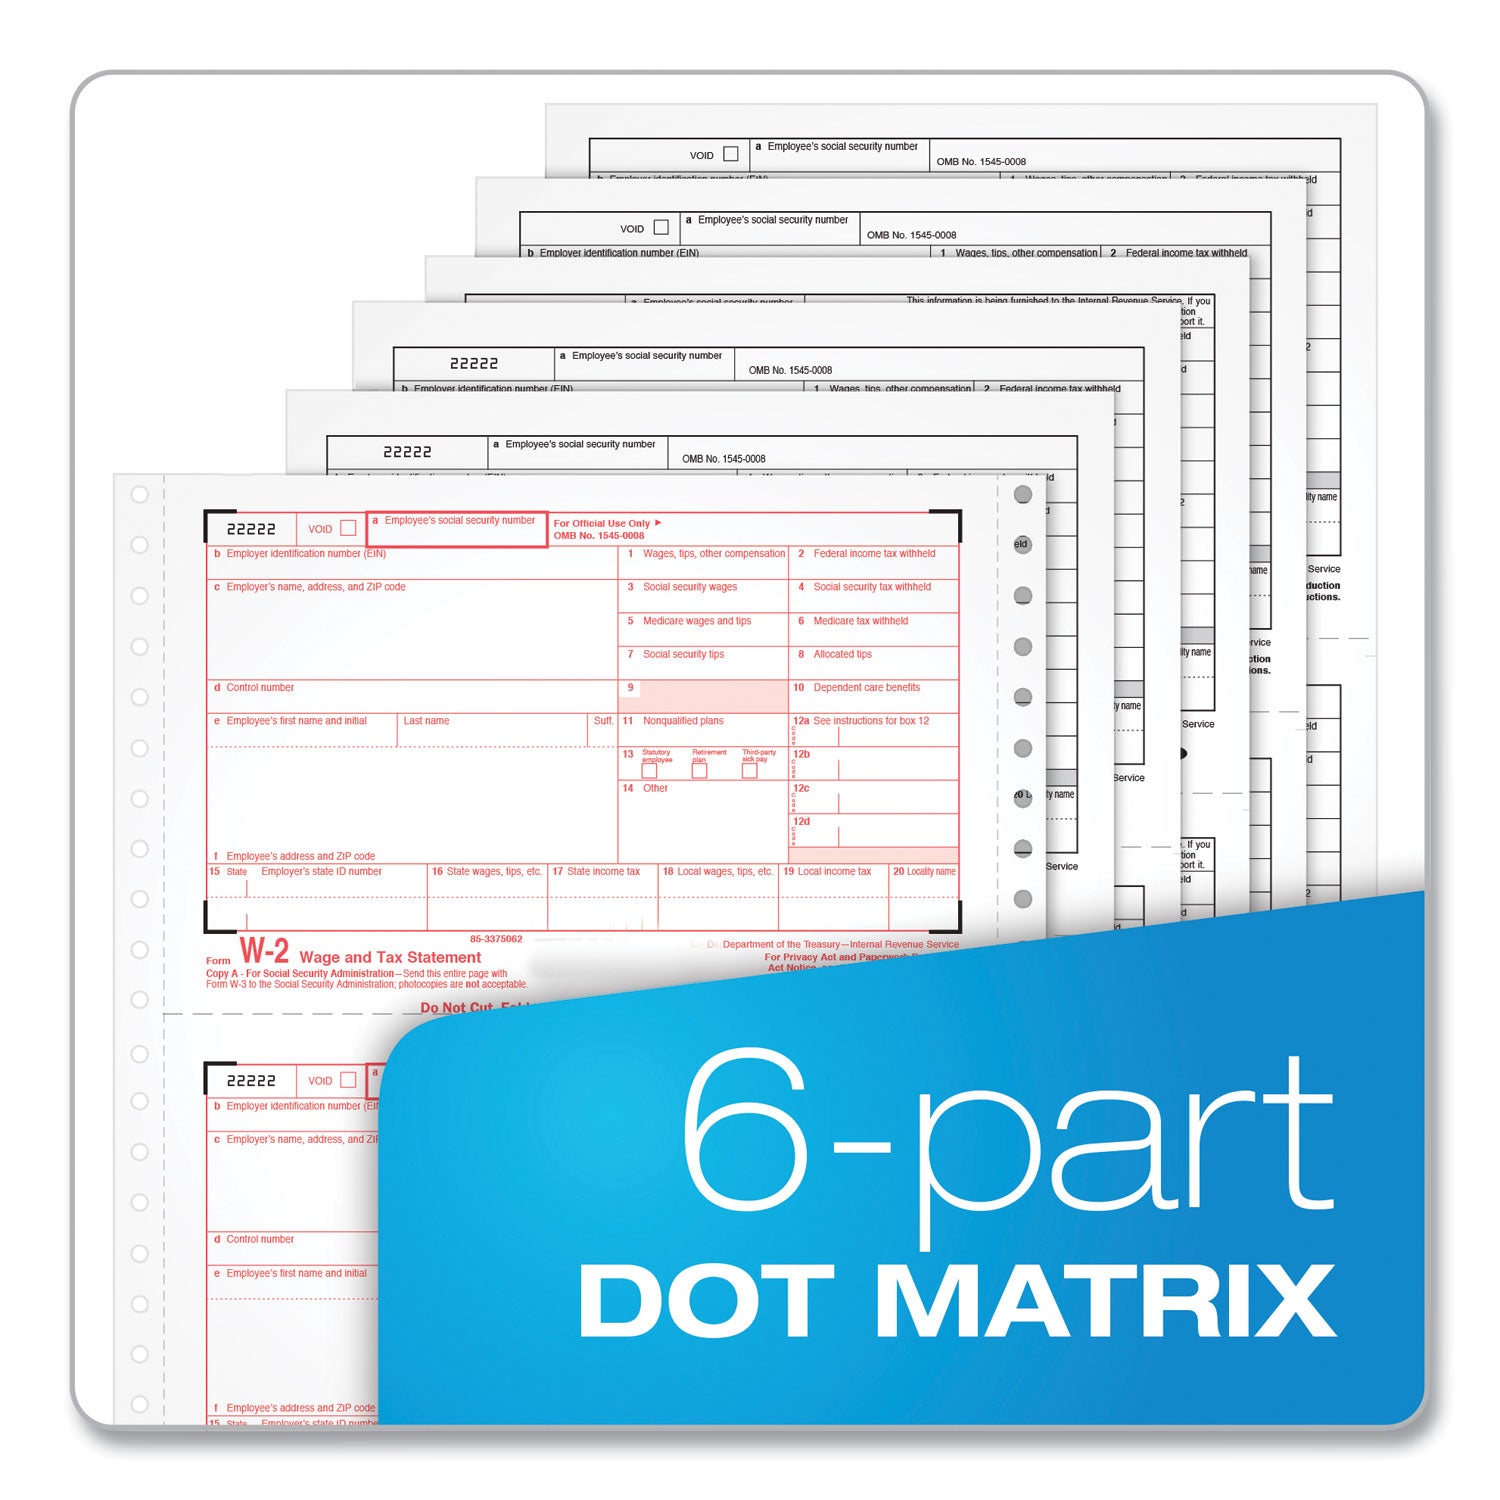 W-2 Tax Forms for Dot Matrix Printers, Fiscal Year: 2023, Six-Part Carbonless, 5.5 x 8.5, 2 Forms/Sheet, 24 Forms Total - 